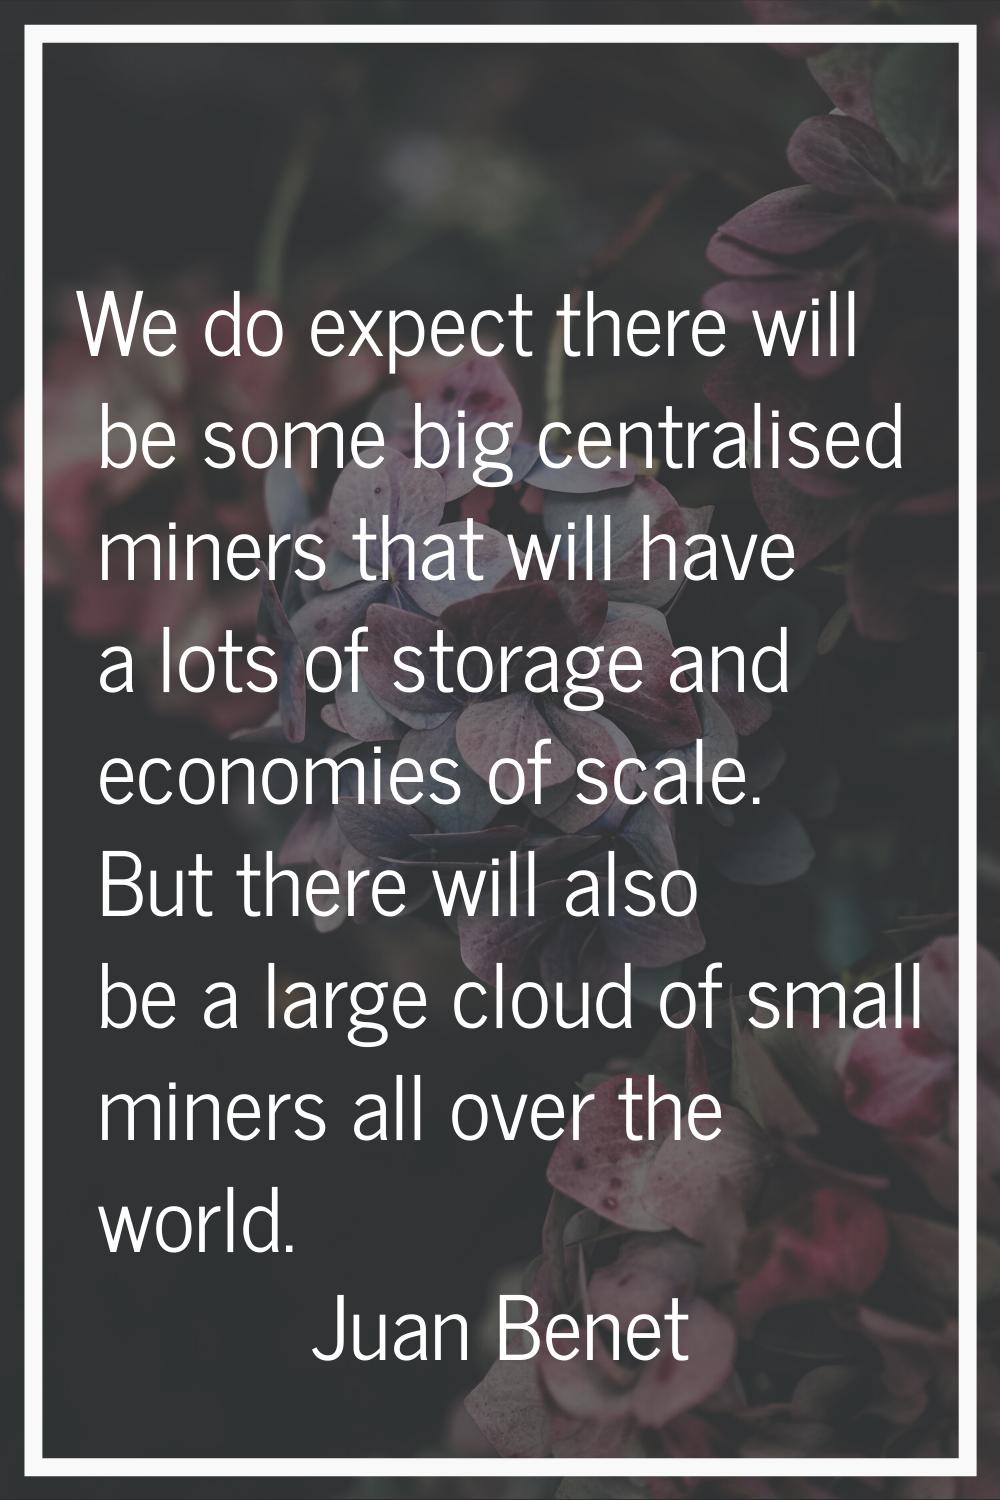 We do expect there will be some big centralised miners that will have a lots of storage and economi